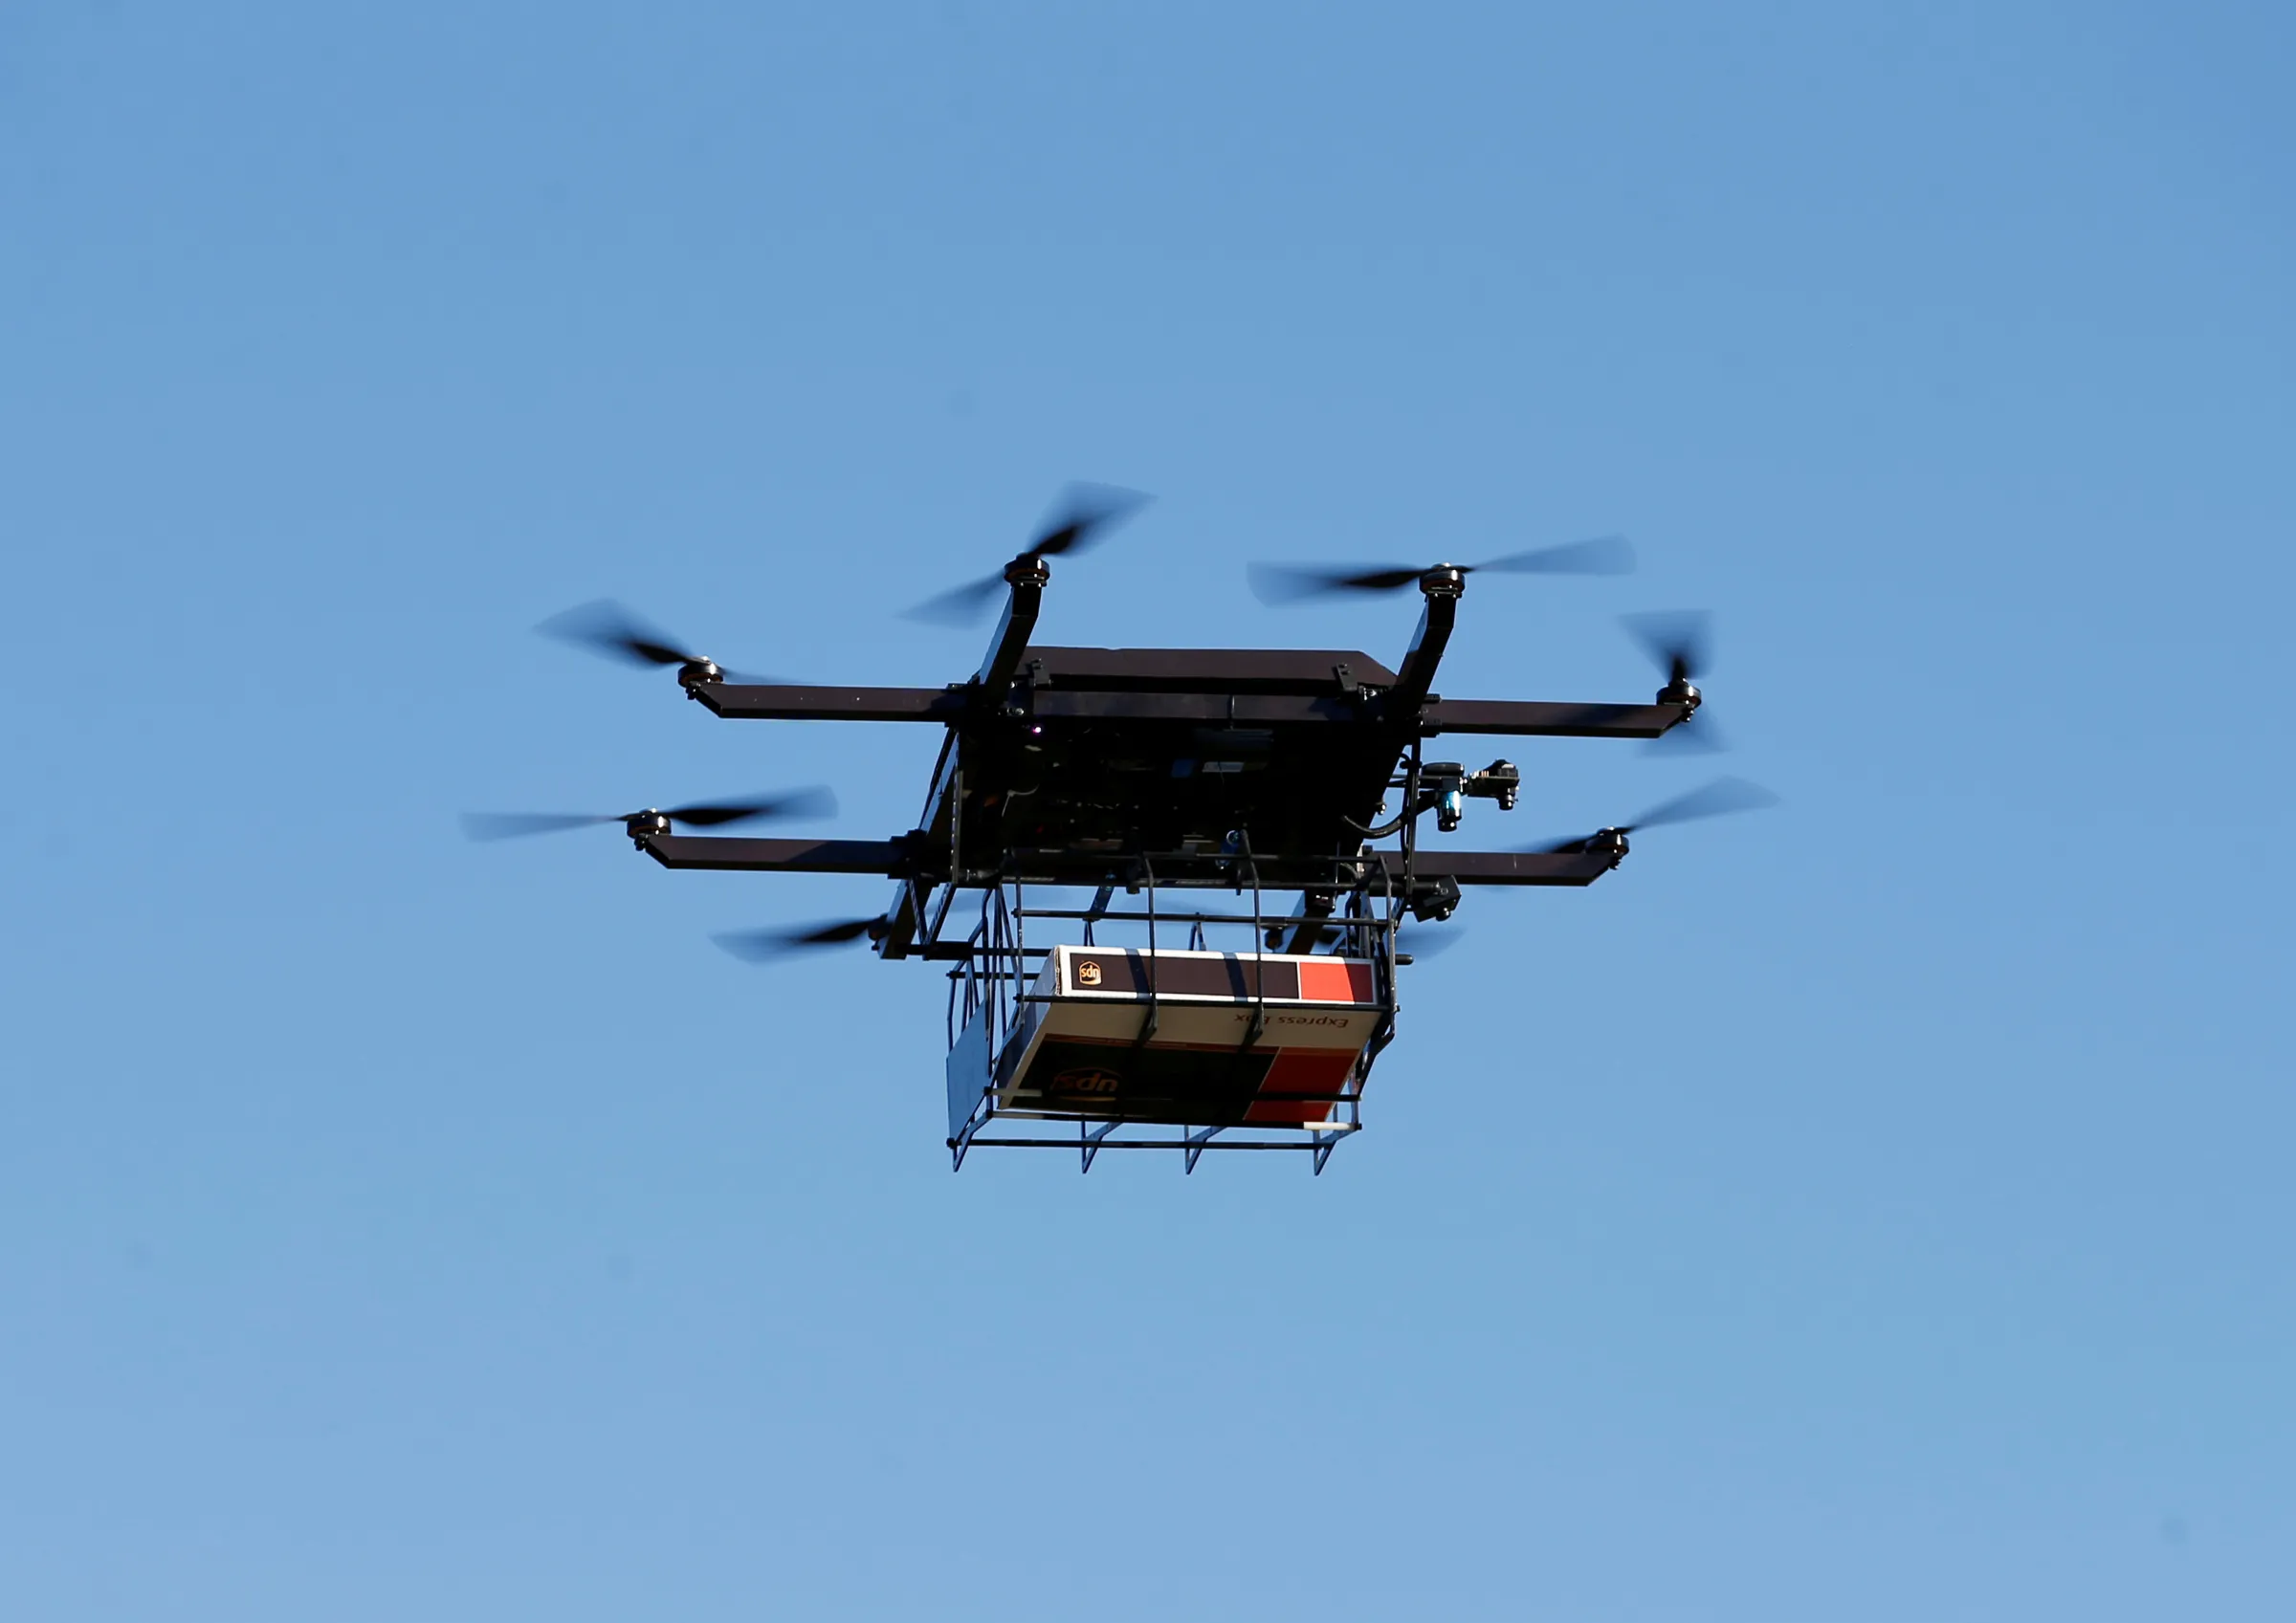 A drone demonstrates delivery capabilities from the top of a UPS truck during testing in Lithia, Florida, U.S. February 20, 2017